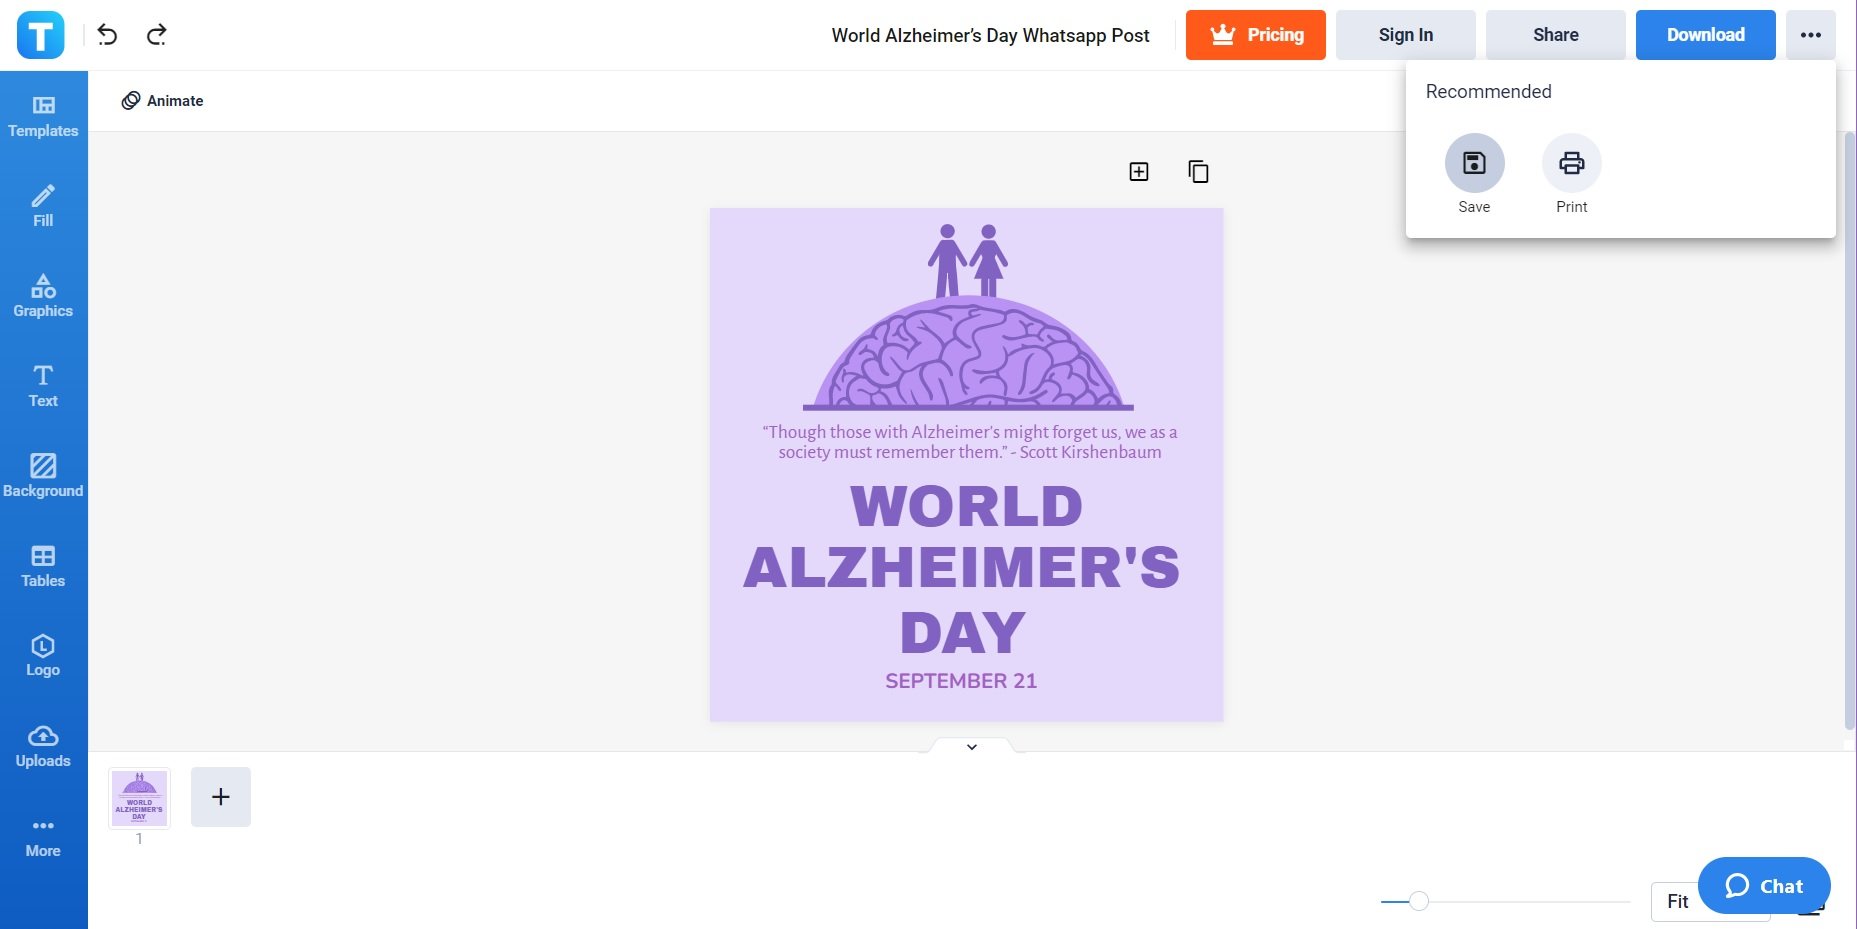 how to create a world alzheimers day social media post whatsapp step